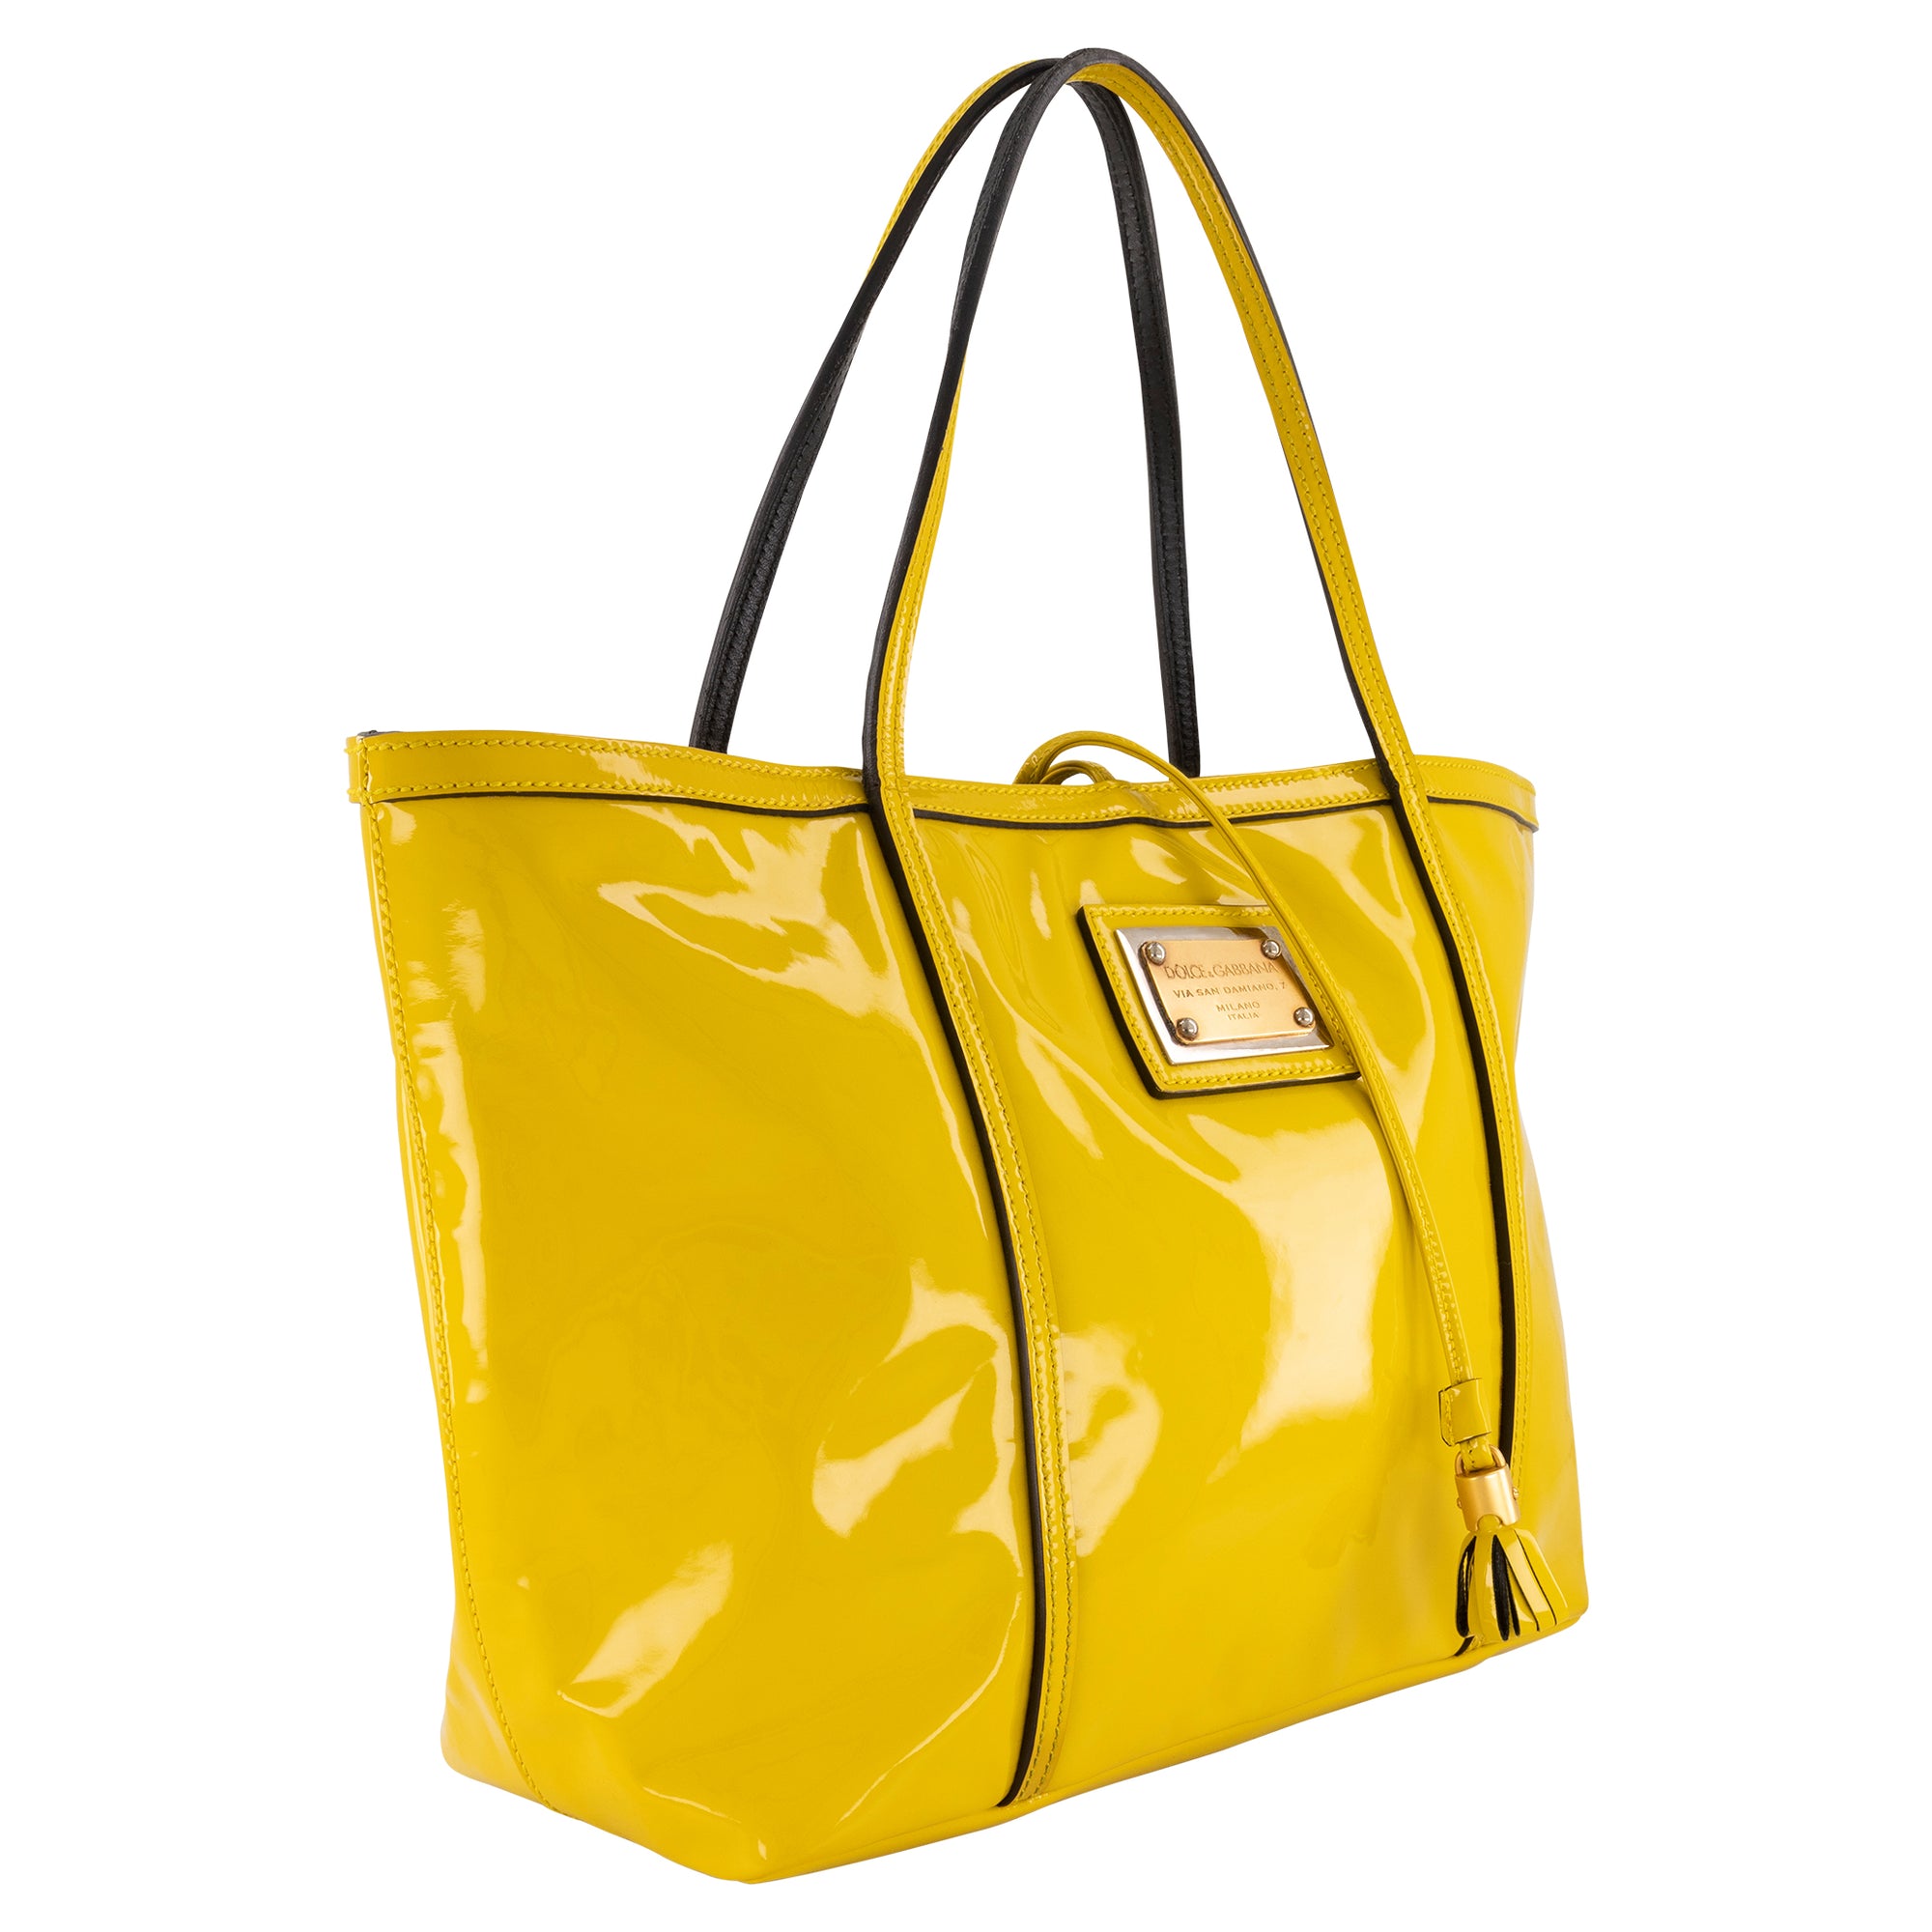 Dolce & Gabbana Patent Leather Tote Bag